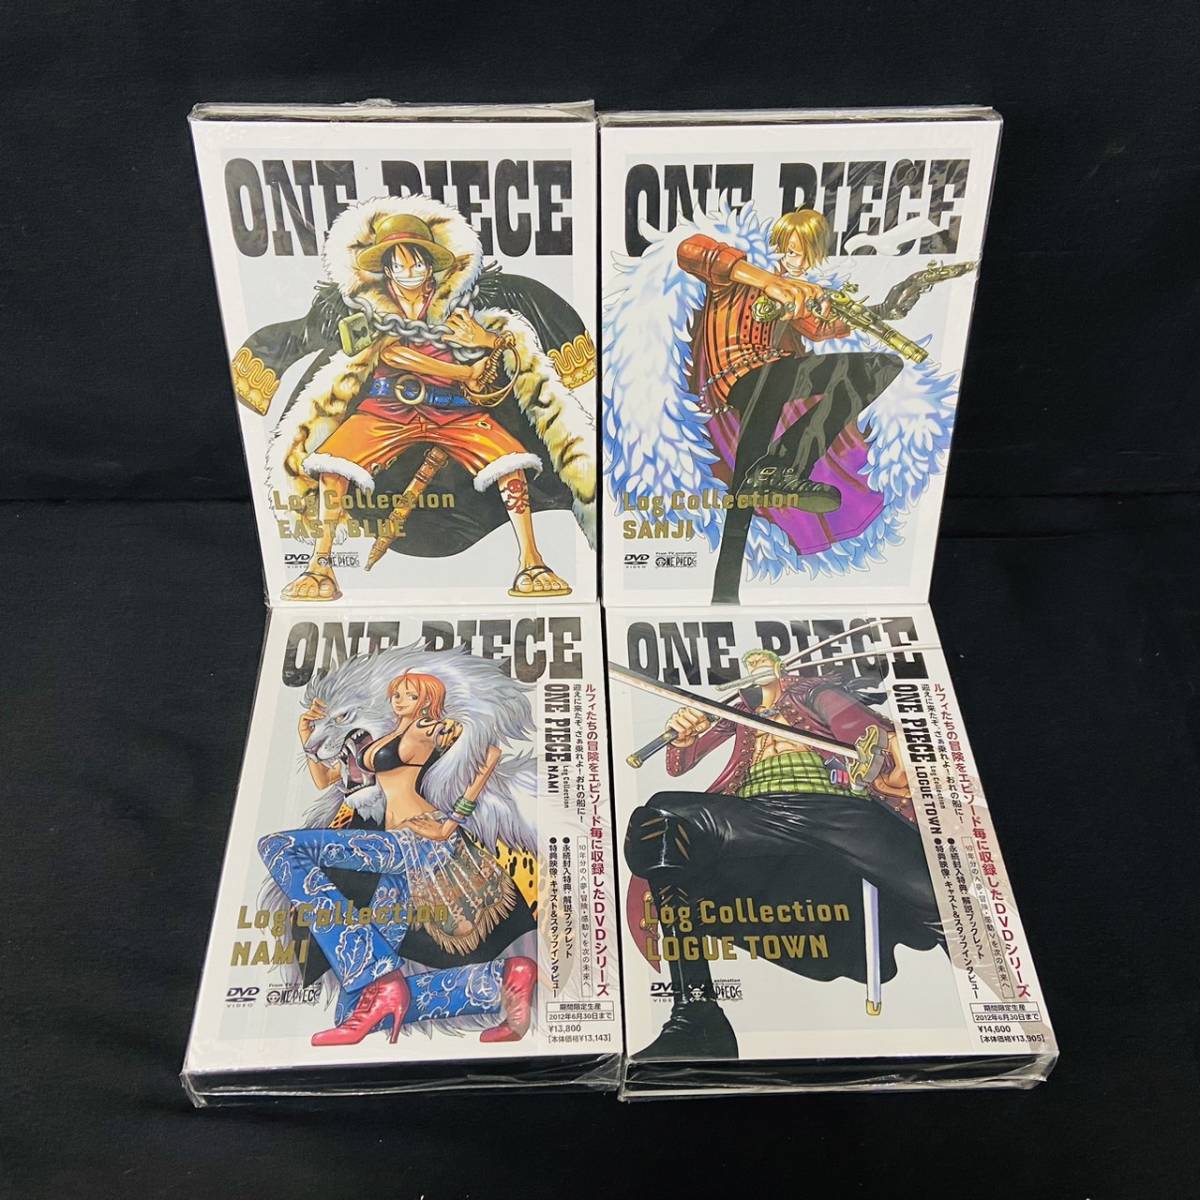 【USED】ONE PIECE Log Collection ワンピース ログコレクション DVD 4巻セット EAST BLUE / SANJI / NAMI / LOGUE TOWN 集英社 尾田栄一郎_画像1